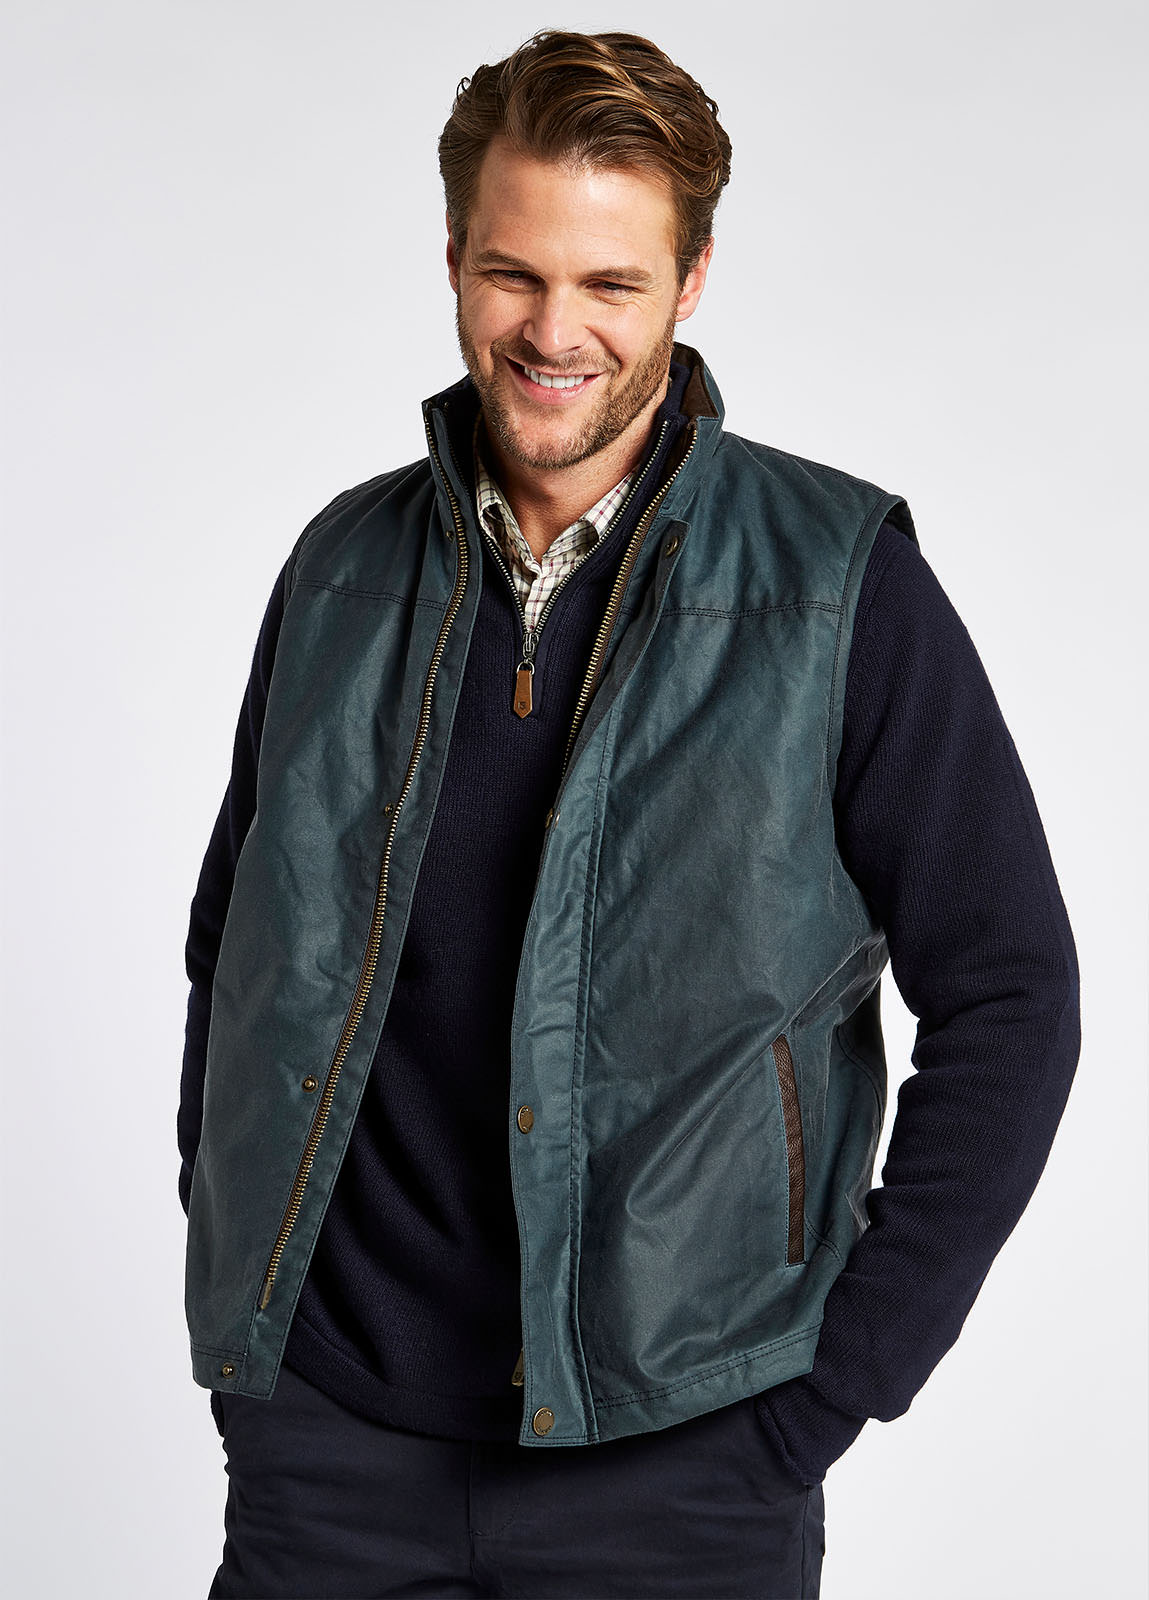 Waist up view of a male model wearing a Dubarry Mayfly wax gilet jacket for men. dark pebble blue green coloured gilet with full zip opened with buttons along the zip. The model is also wearing a dark jumper and light shirt underneath the gilet.